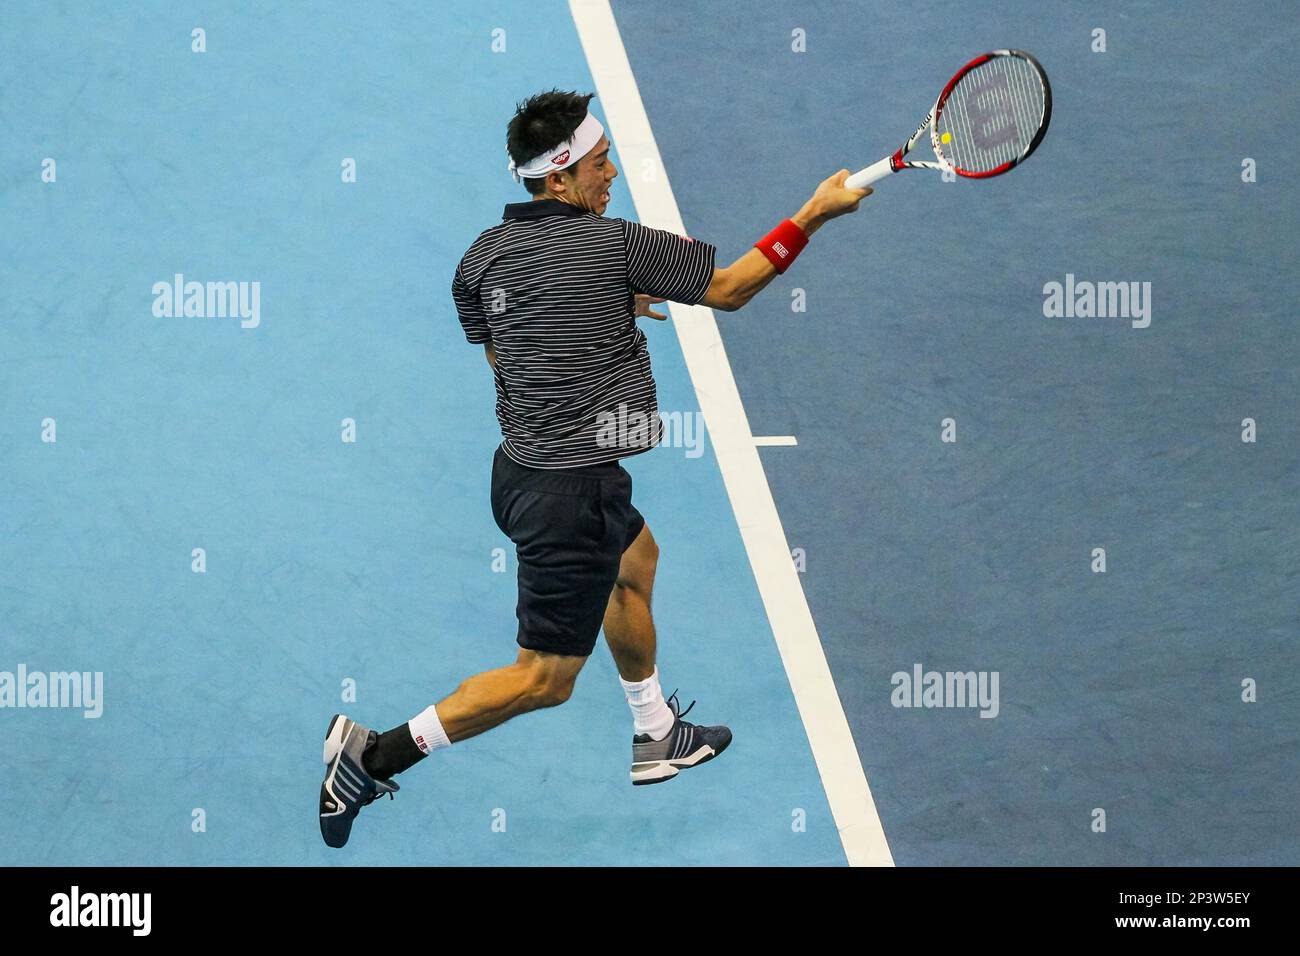 28 September 2014: Kei Nishikori of Japan in action during his 7-6(4), 6-4  win over Julien Benneteau of France in the final match of ATP World Tour  250 Malaysian Open, Kuala Lumpur